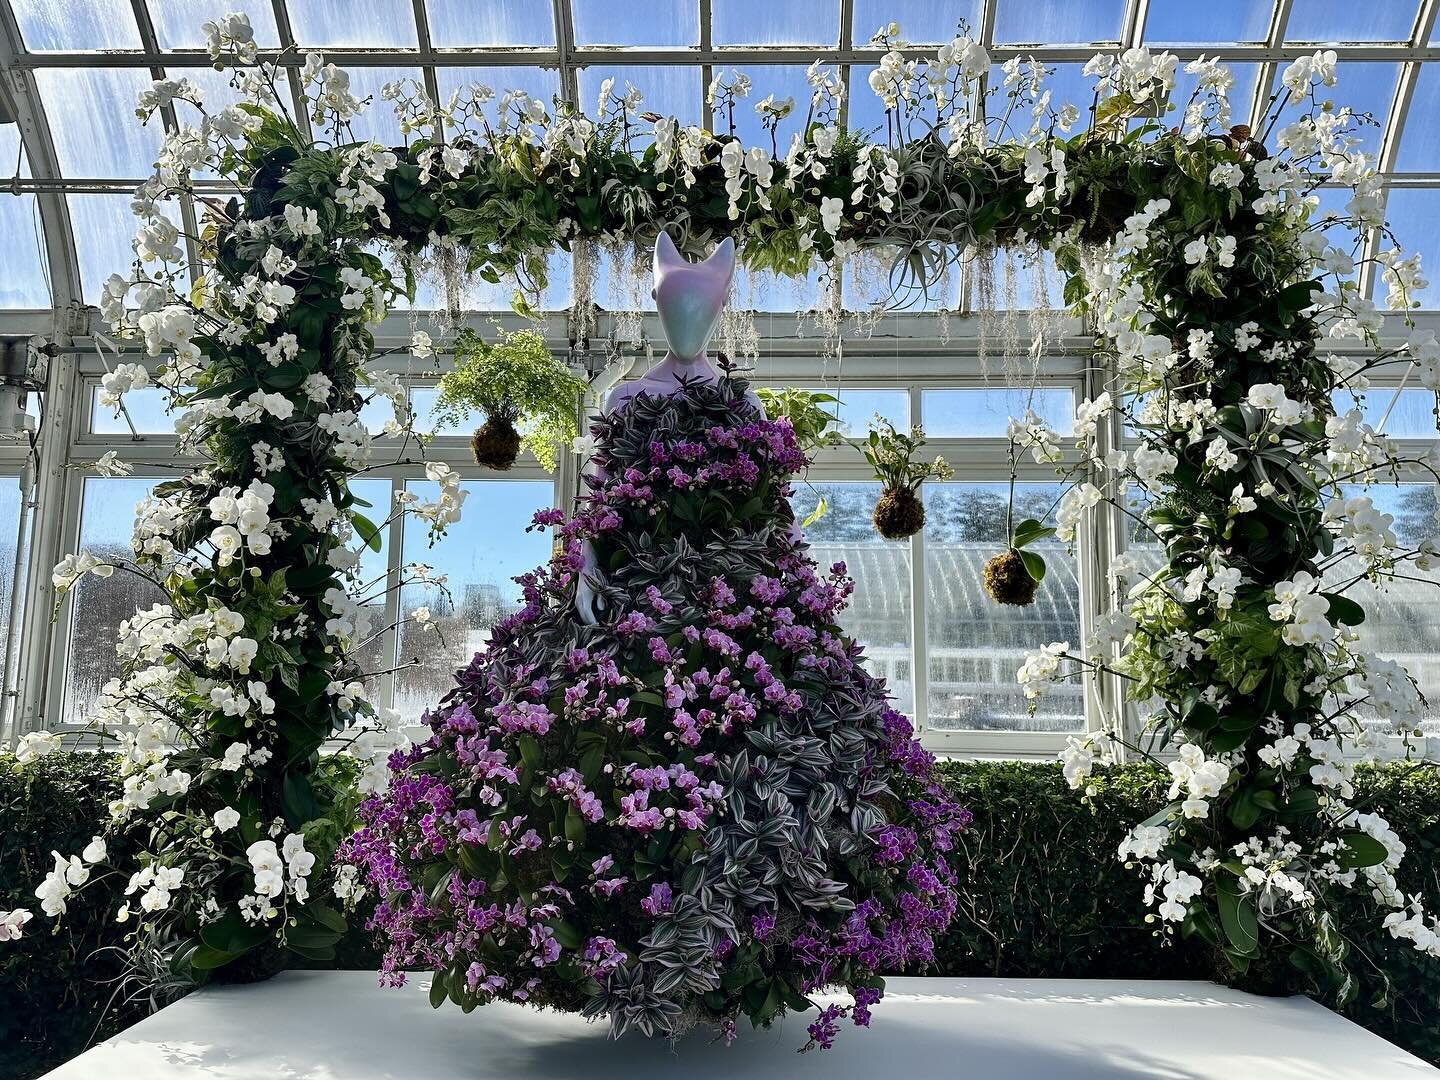 If you can&rsquo;t get enough fashion, go see @collinastrada and @dauphinette.nyc featured in the @nybg&rsquo;s latest show: &ldquo;The Orchid Show: Florals in Fashion.&rdquo;

On view from 2/17-4/21.